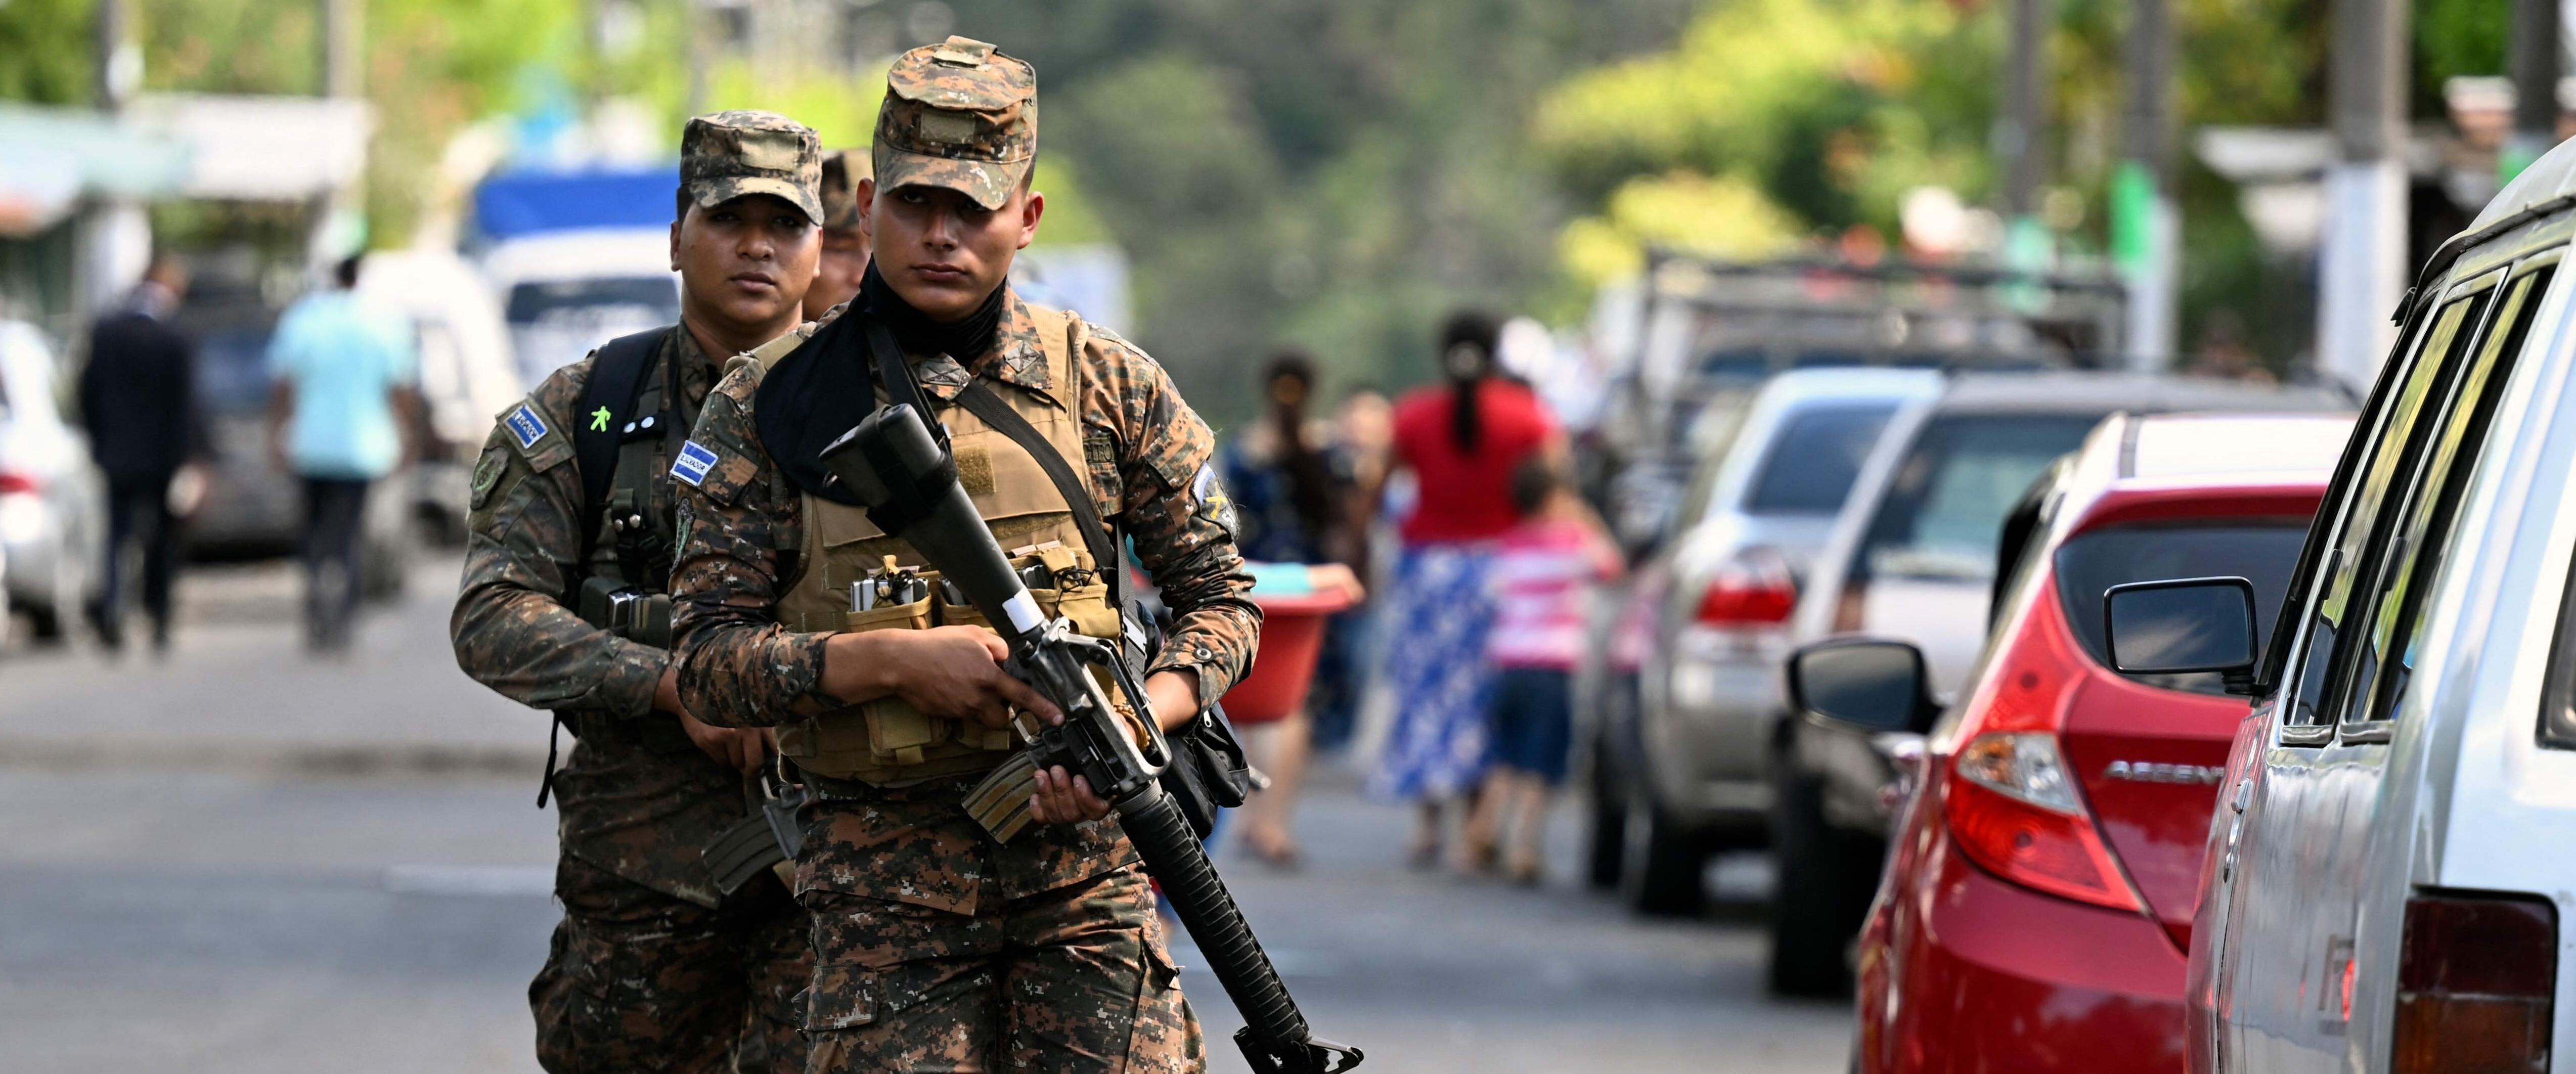 Soldiers patrol during an operation against gang members in La Campanera, a community historically controlled by the 18th street gang, in Soyapango, El Salvador, on December 4, 2022. - Around 10,000 Salvadoran army troops and police officers surrounded the populous city of Soyapango, on the outskirts of capital San Salvador, as the government stepped up its fight against criminal gangs, President Nayib Bukele announced Saturday. (Photo by Marvin RECINOS / AFP)